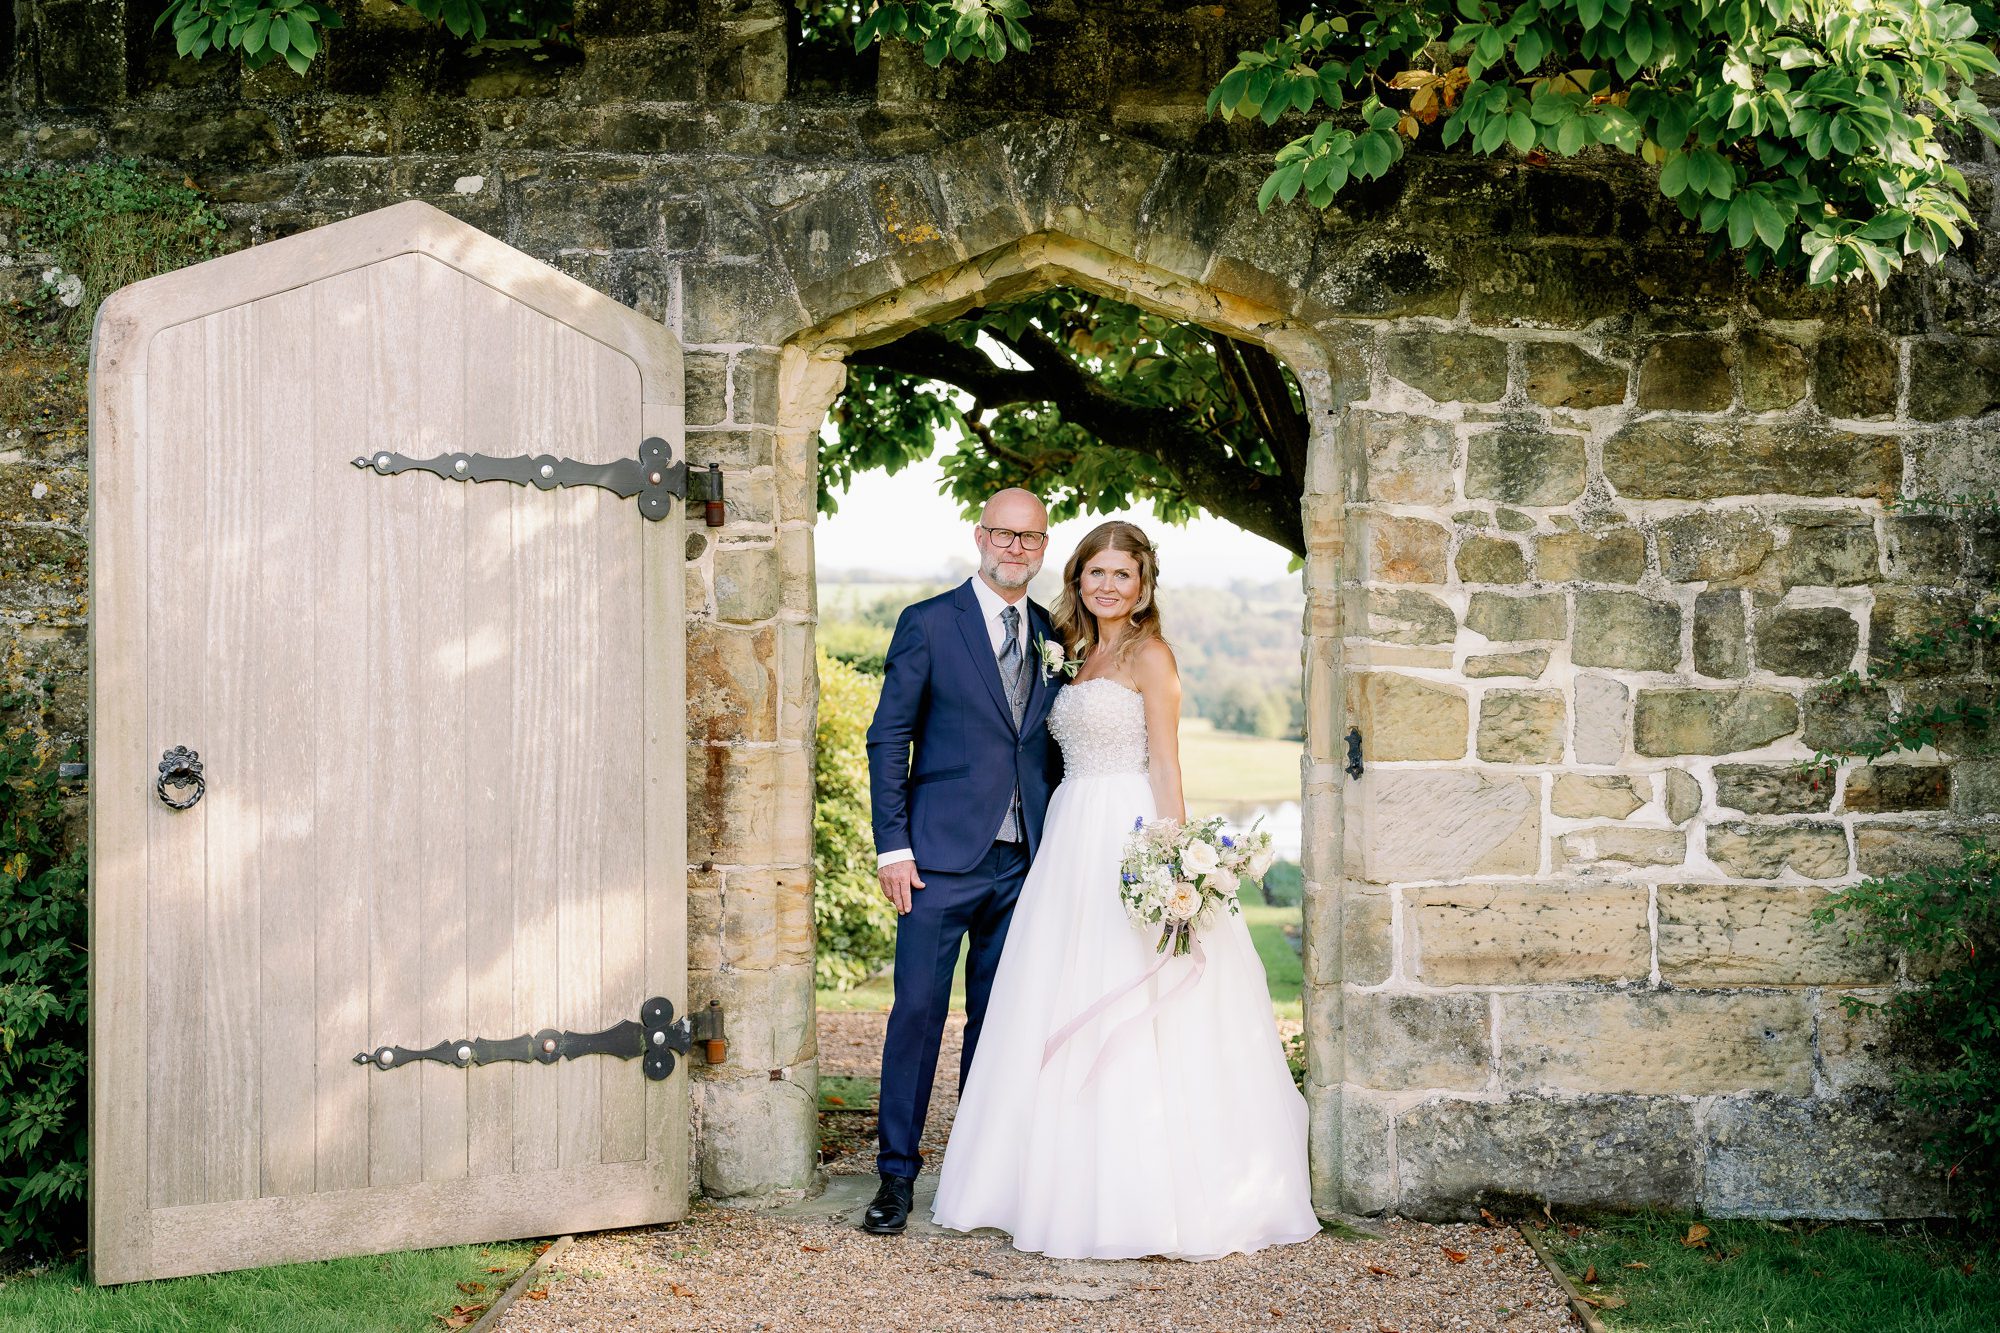 Highly ranked wedding photographers in England.